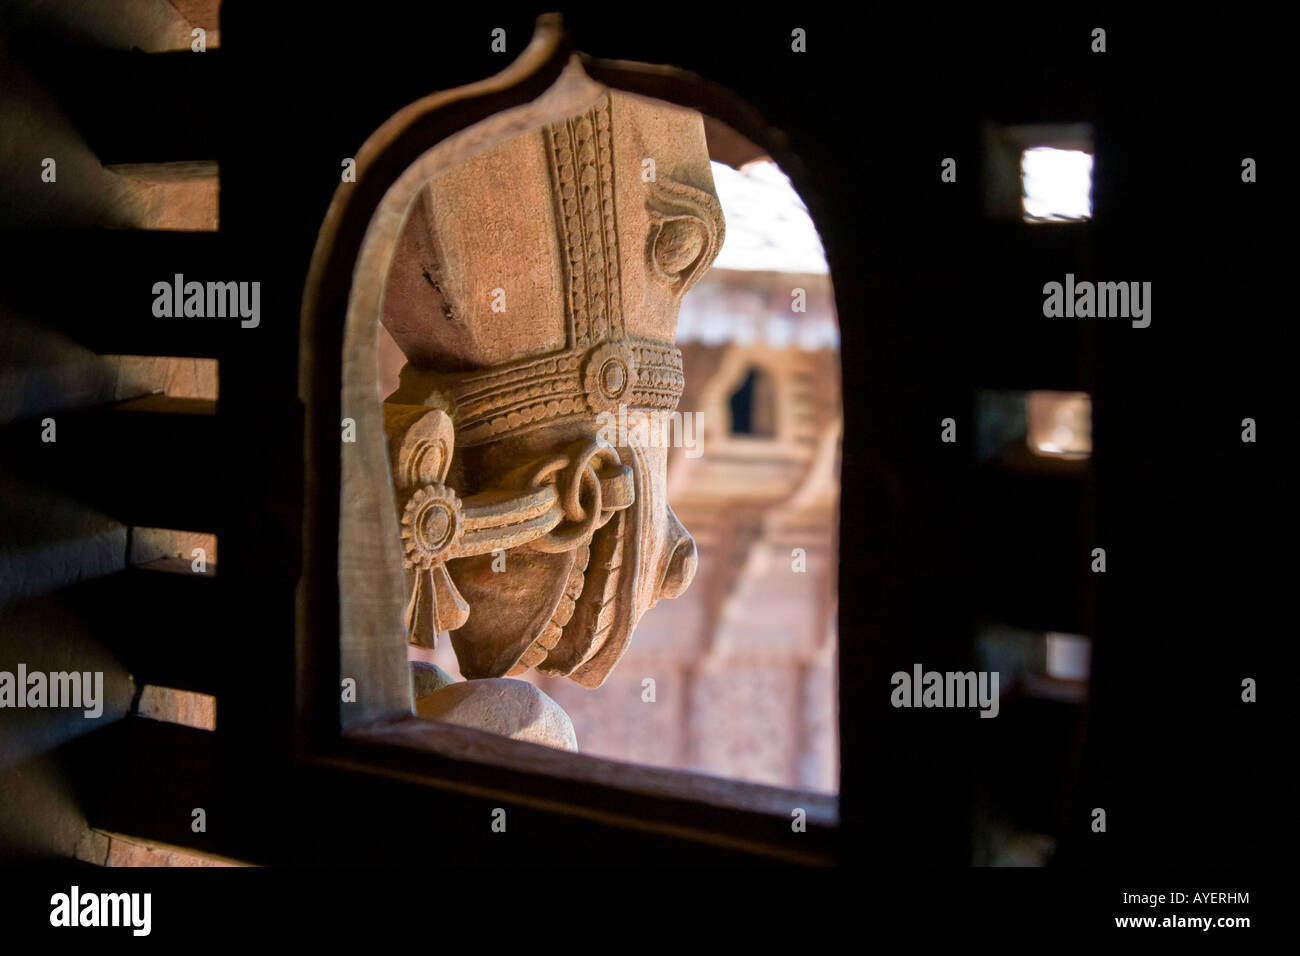 One of the Carved Wooden Horses Lining the Outside of Puthe Maliga Palace Museum in Trivandrum South India Stock Photo